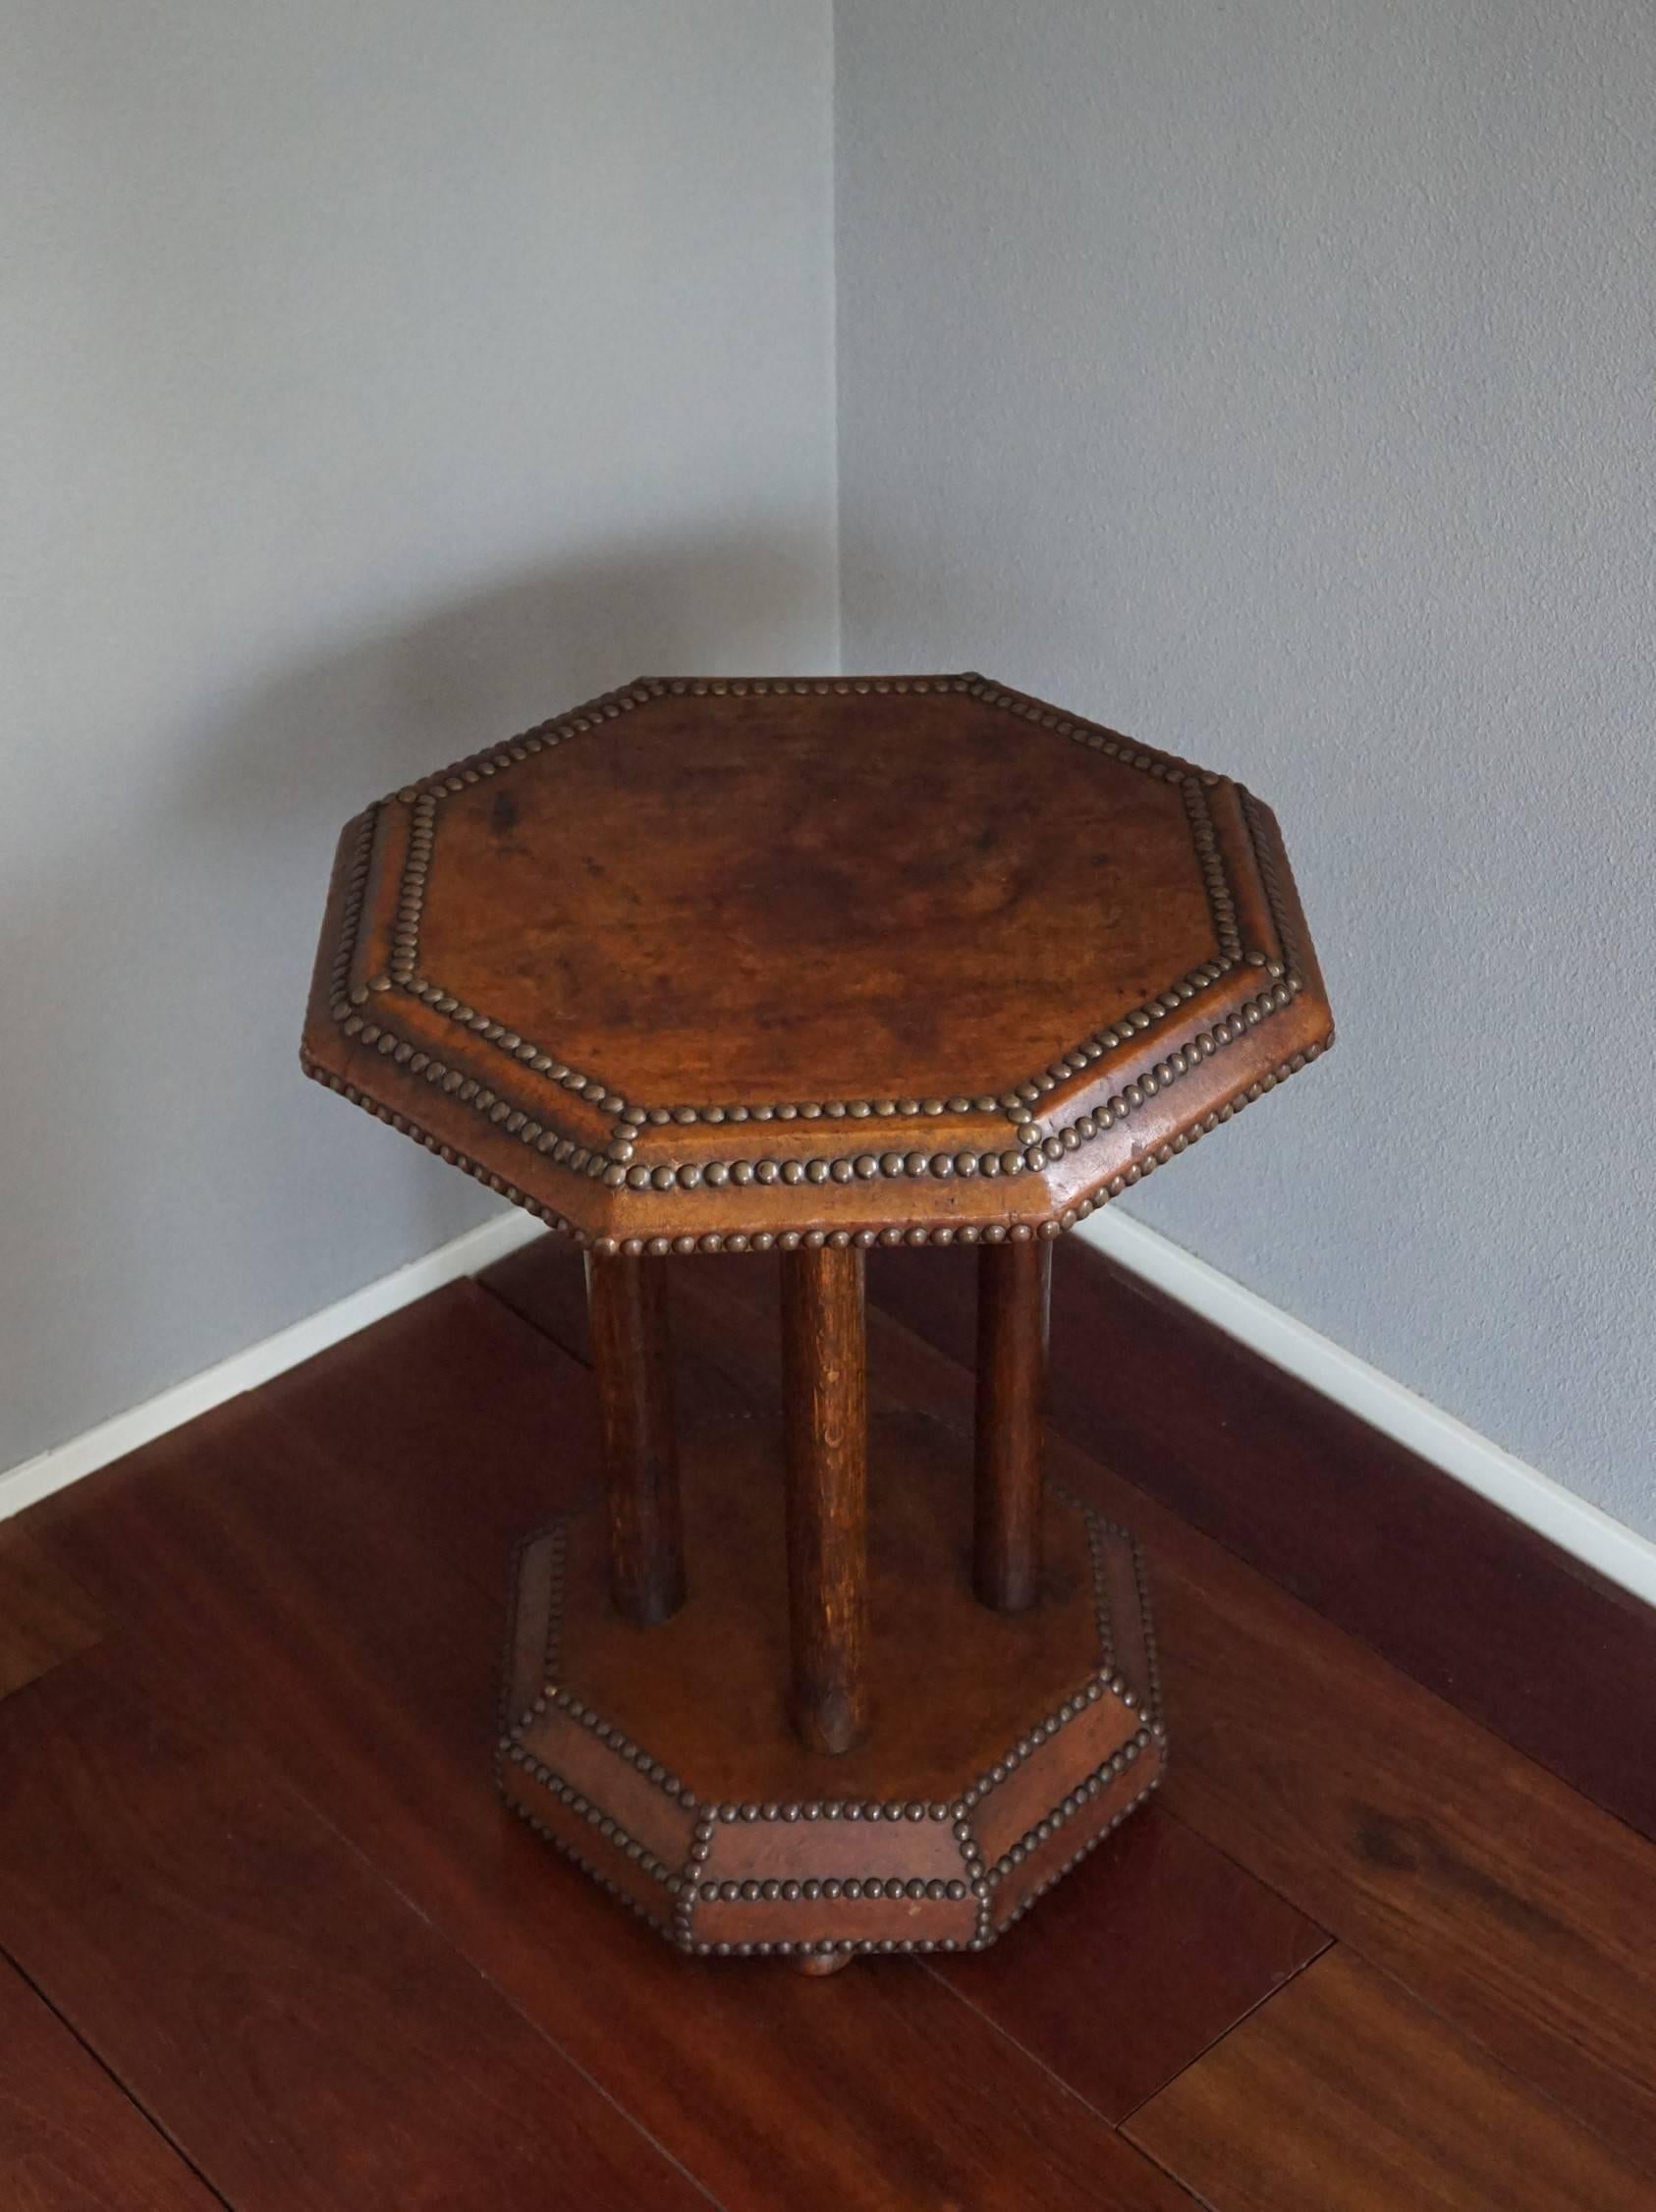 Wonderful, sheepskin leather Art Deco table.

This handcrafted oak and leather table is of a timeless design and it will look great in all kinds of interiors. The aging of all three materials combined has given this wonderful and rare table its